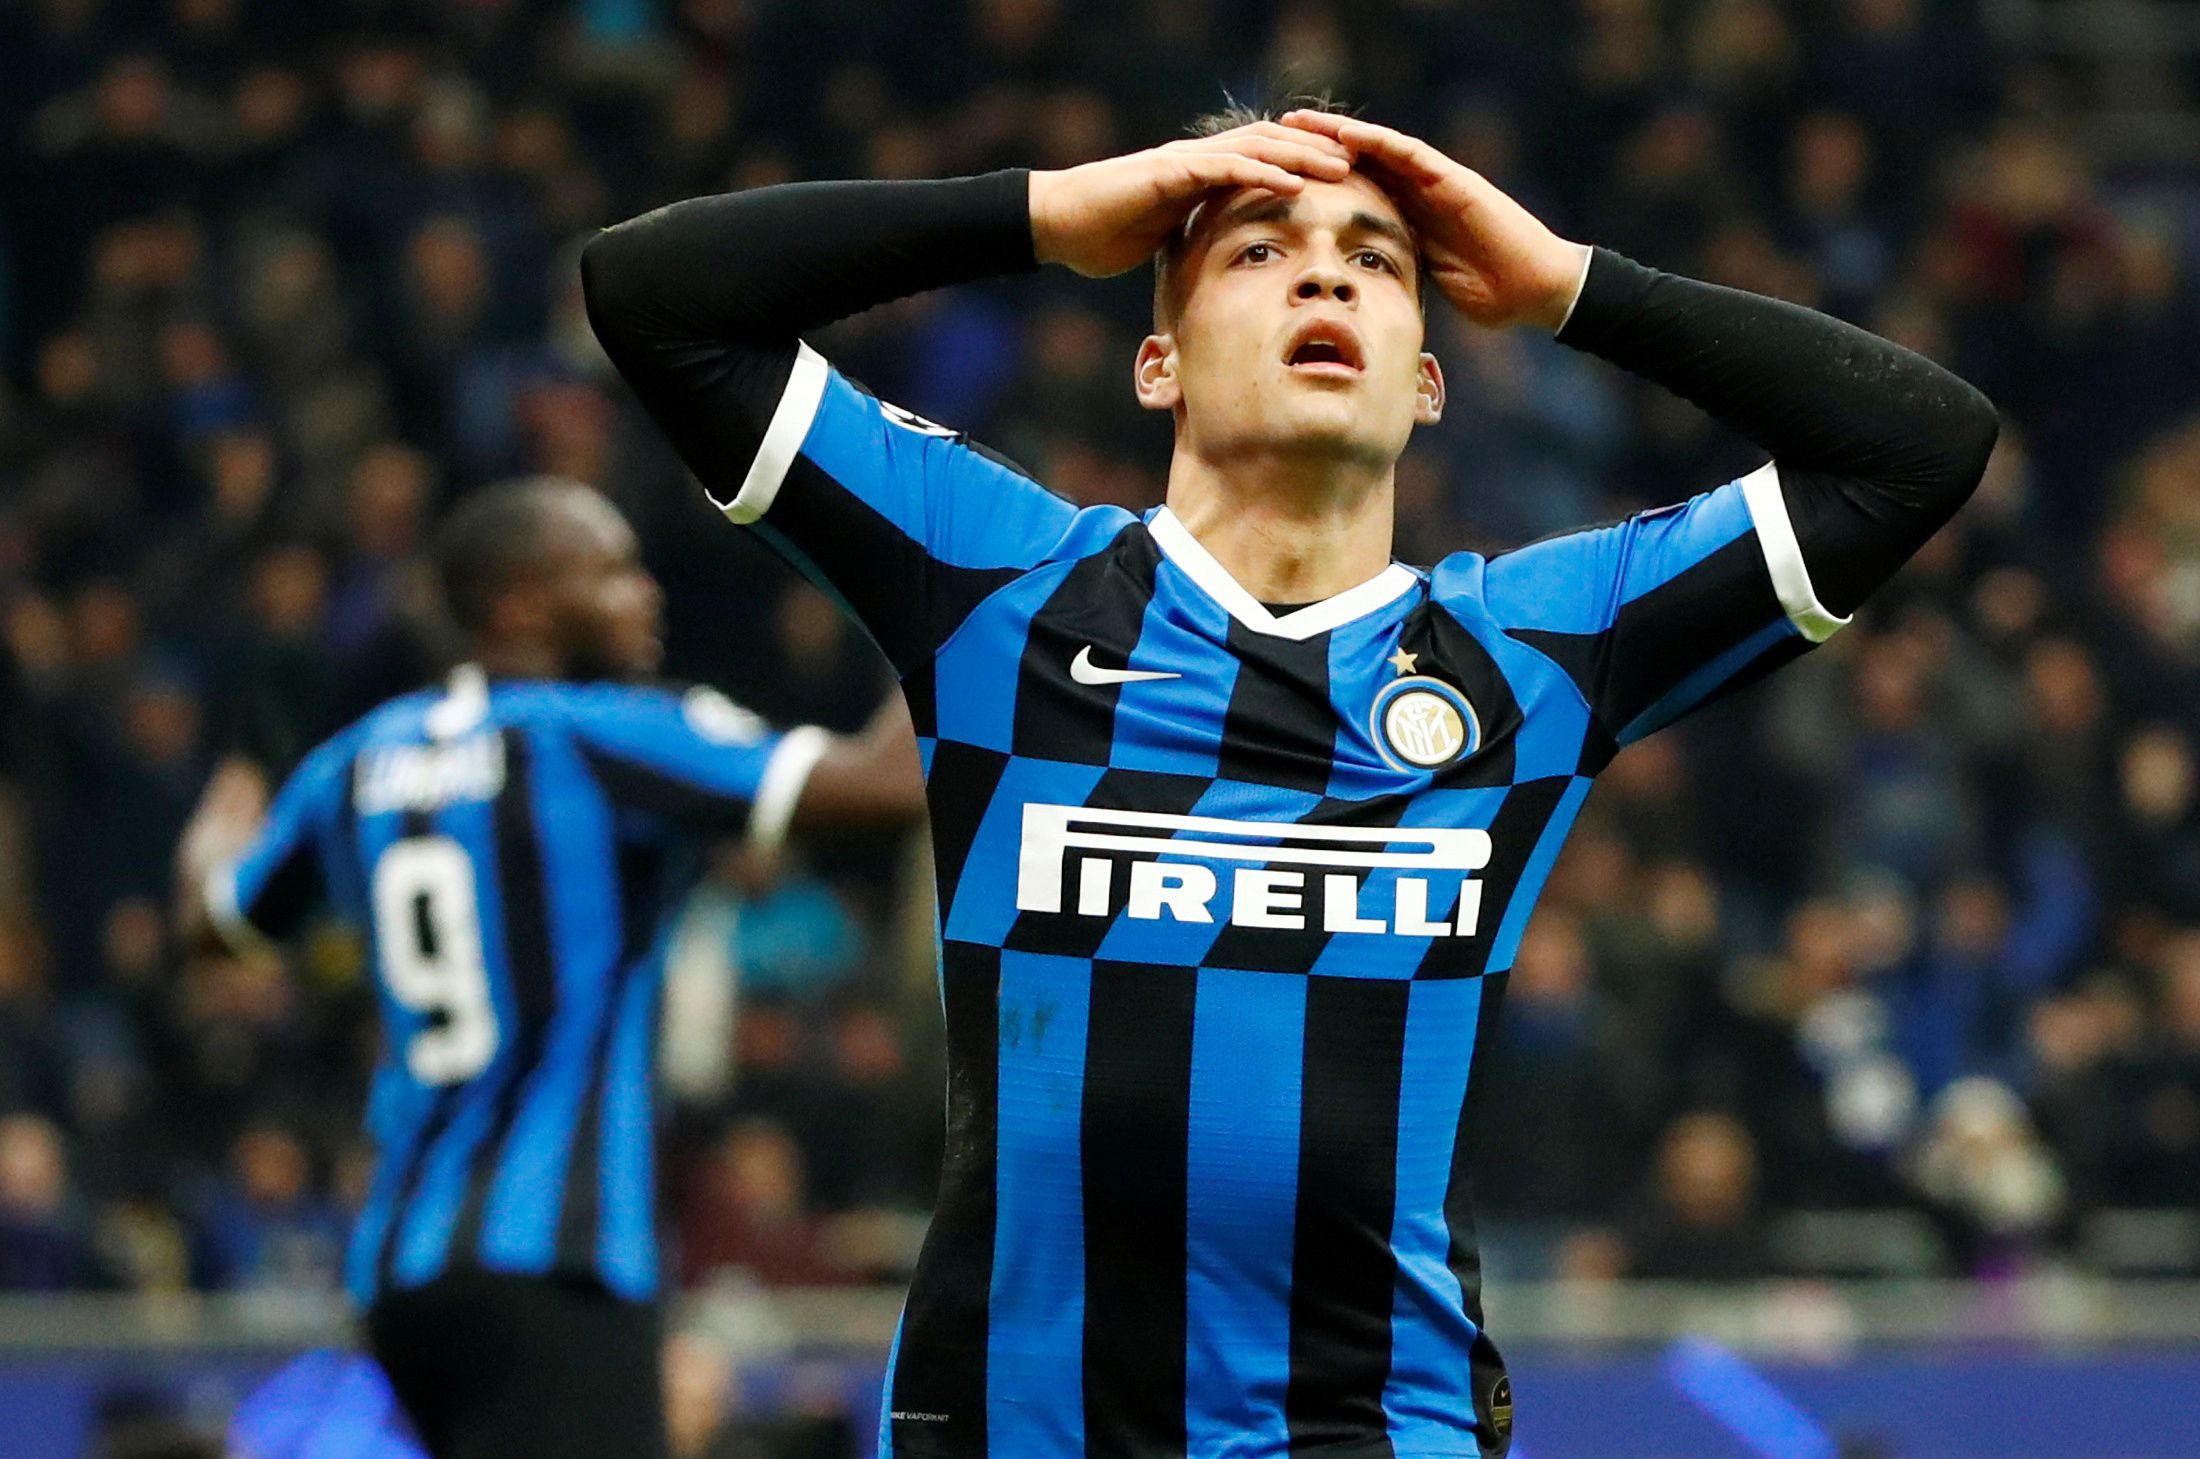 Soccer Football - Champions League - Group F - Inter Milan v FC Barcelona - San Siro, Milan, Italy - December 10, 2019 Inter Milan's Lautaro Martinez reacts after his goal is disallowed for offside REUTERS/Alessandro Garofalo TPX IMAGES OF THE DAY